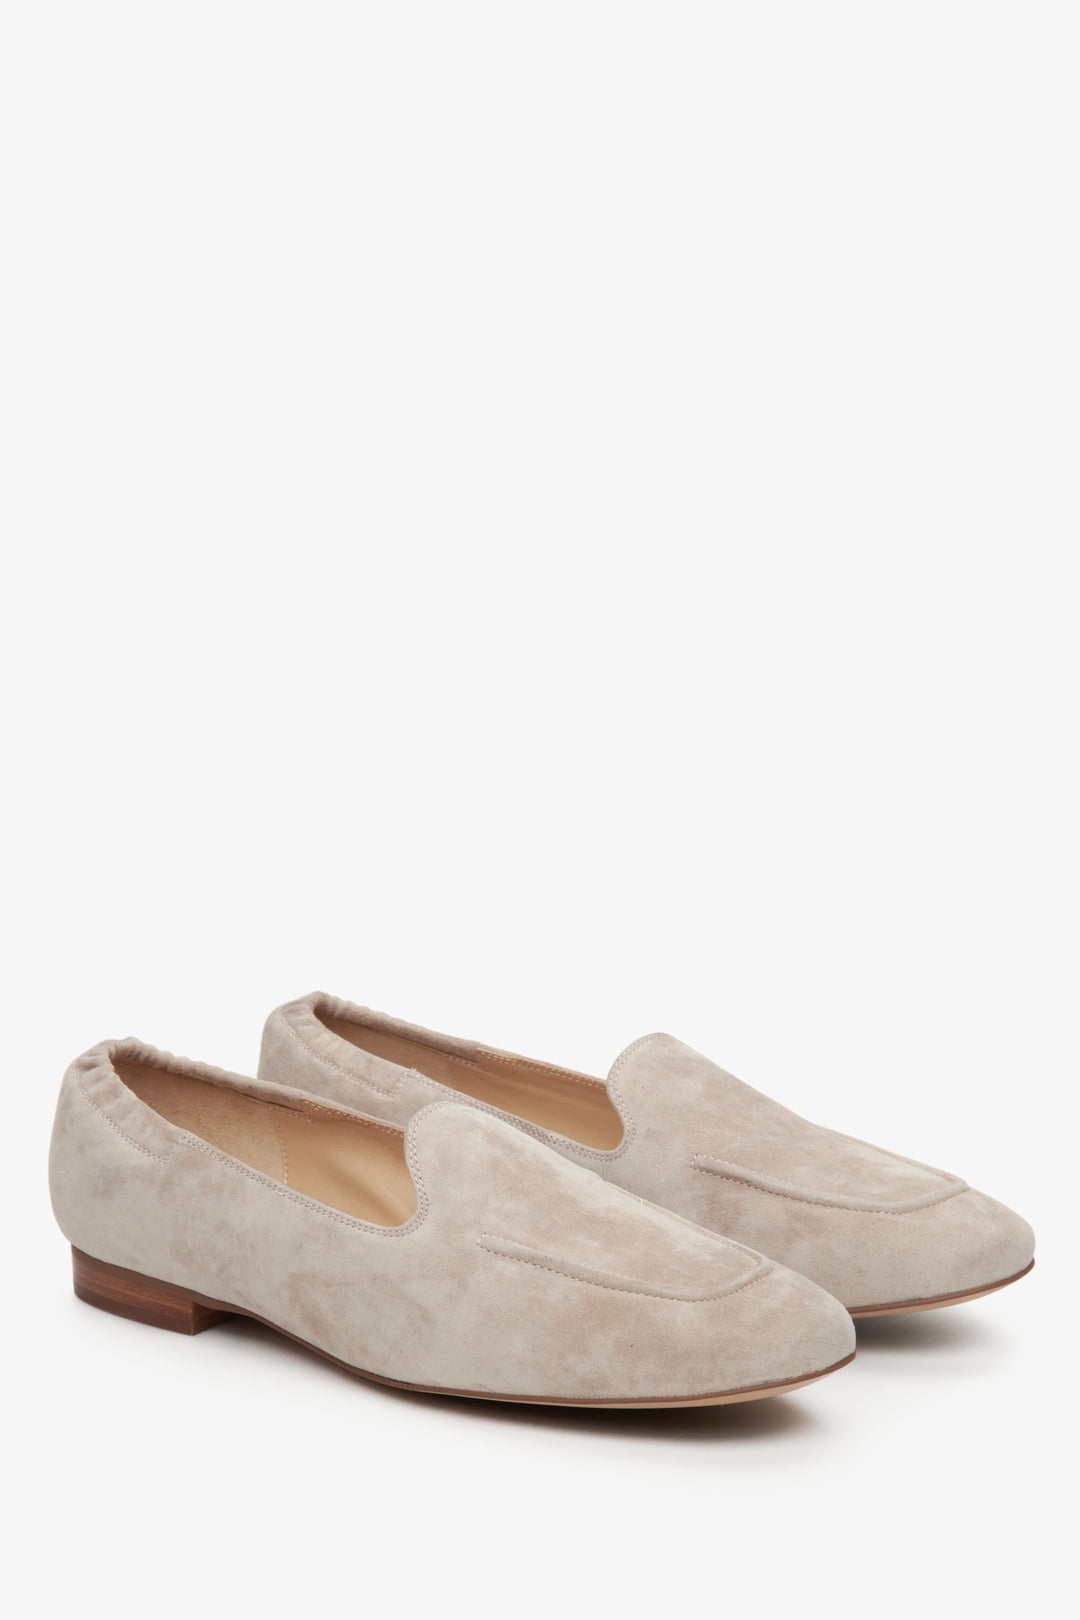 Women's beige moccasins made of genuine velour - presentation of the toe and side vamp.